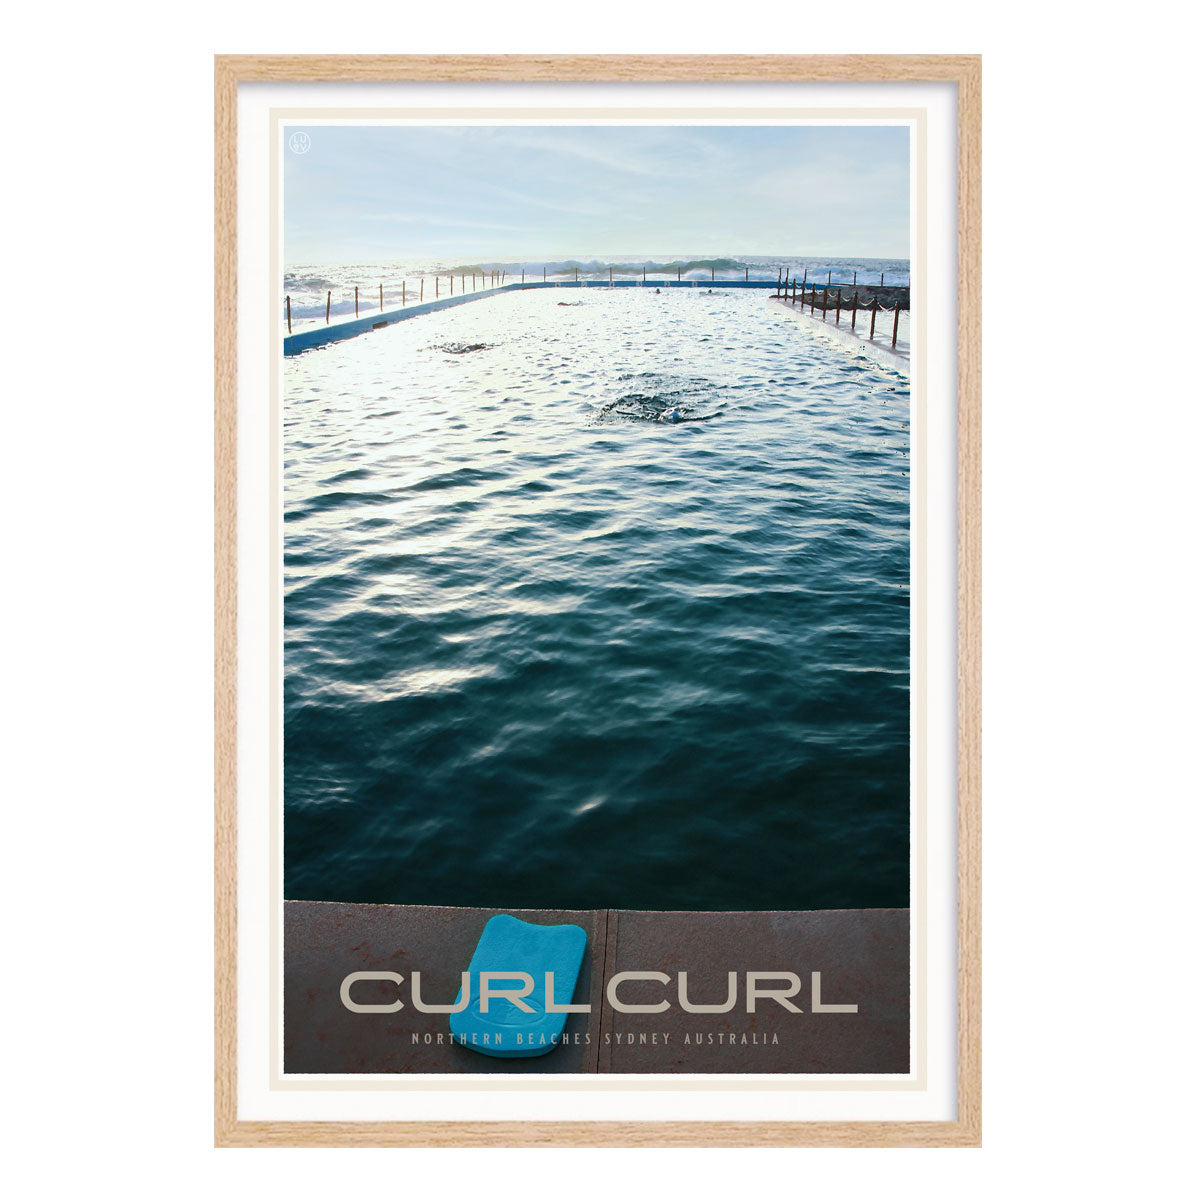 Curl curl pool retro vintage travel poster print in oak from places we luv